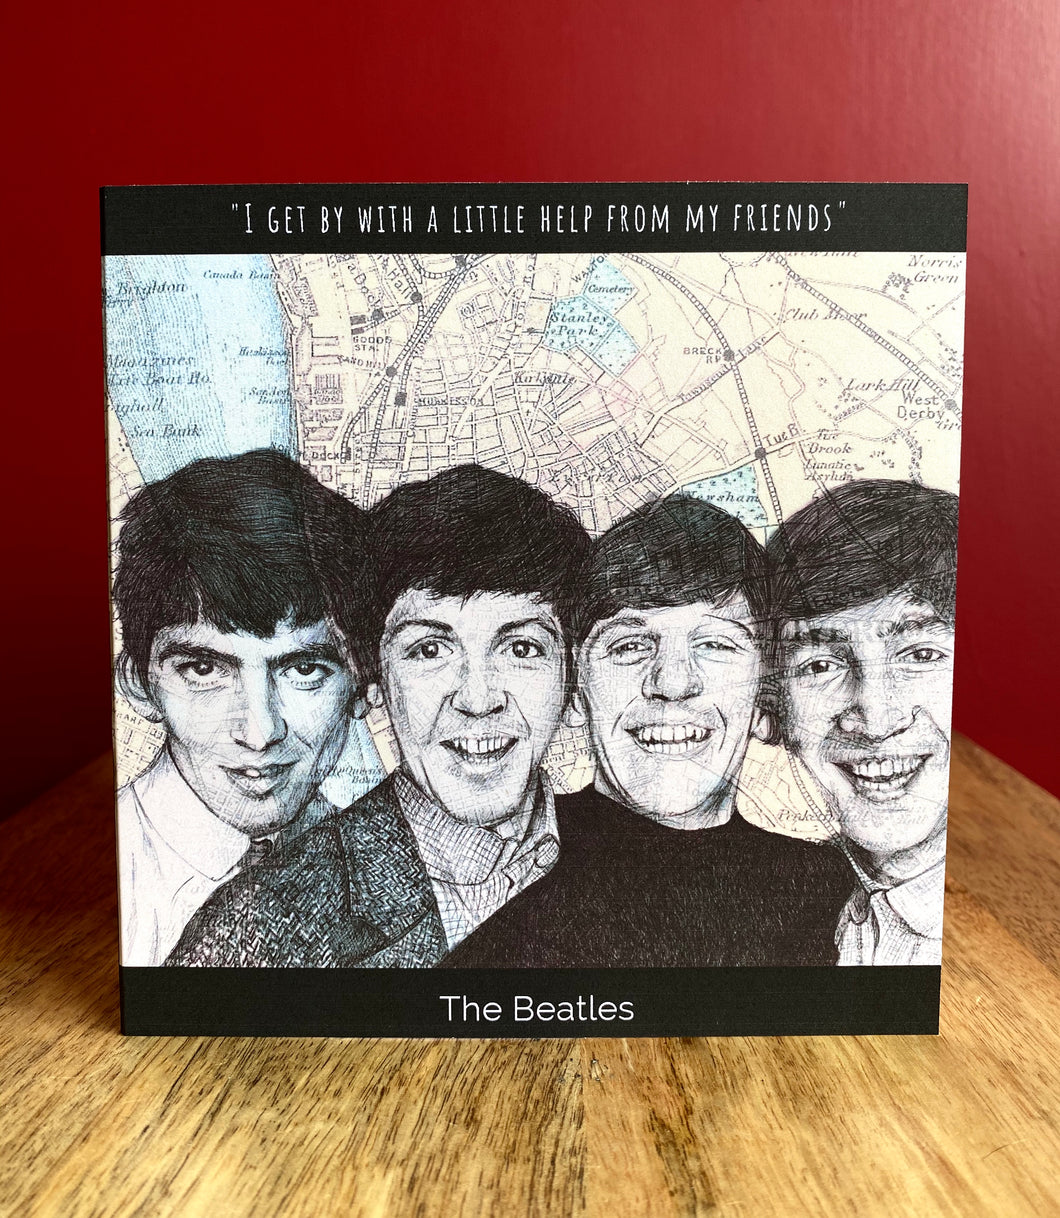 The Beatles Greeting Card. Printed drawing over map of Liverpool. Blank inside